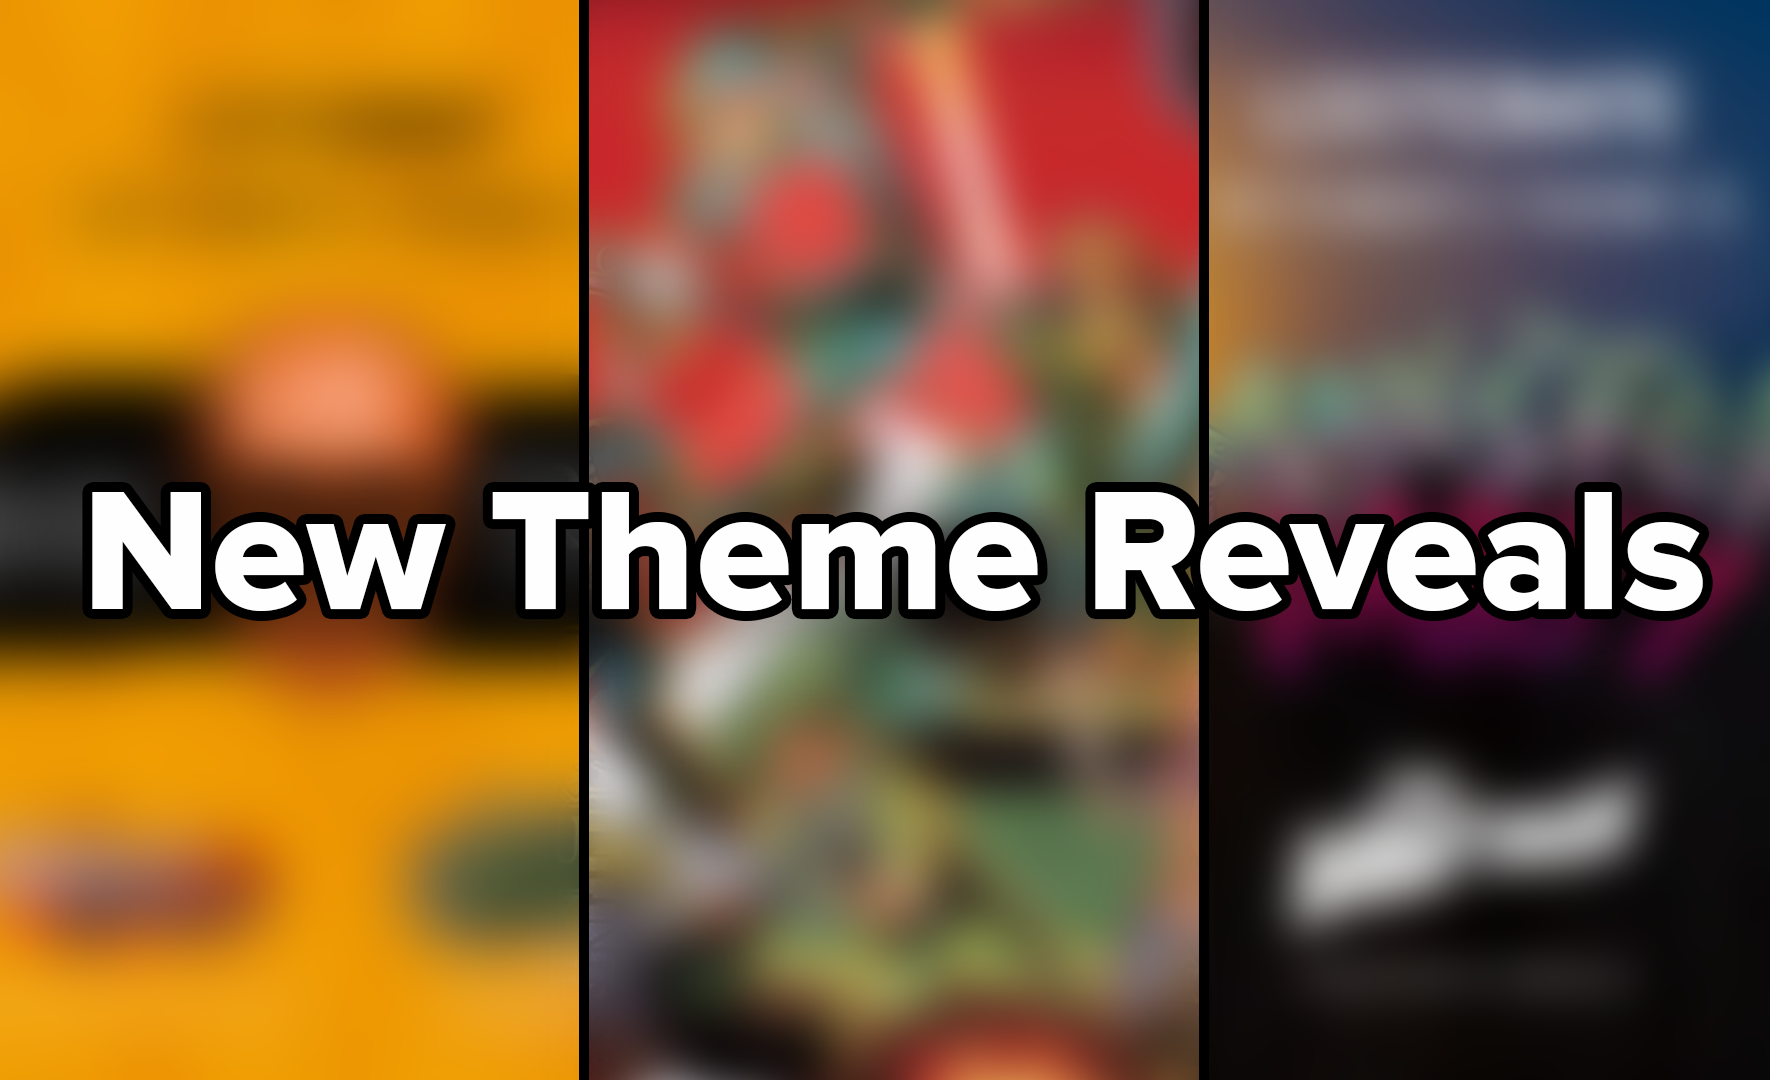 The Daily Crate | THEME REVEAL: New Loot Wear, Loot Crate, and Loot Crate DX!